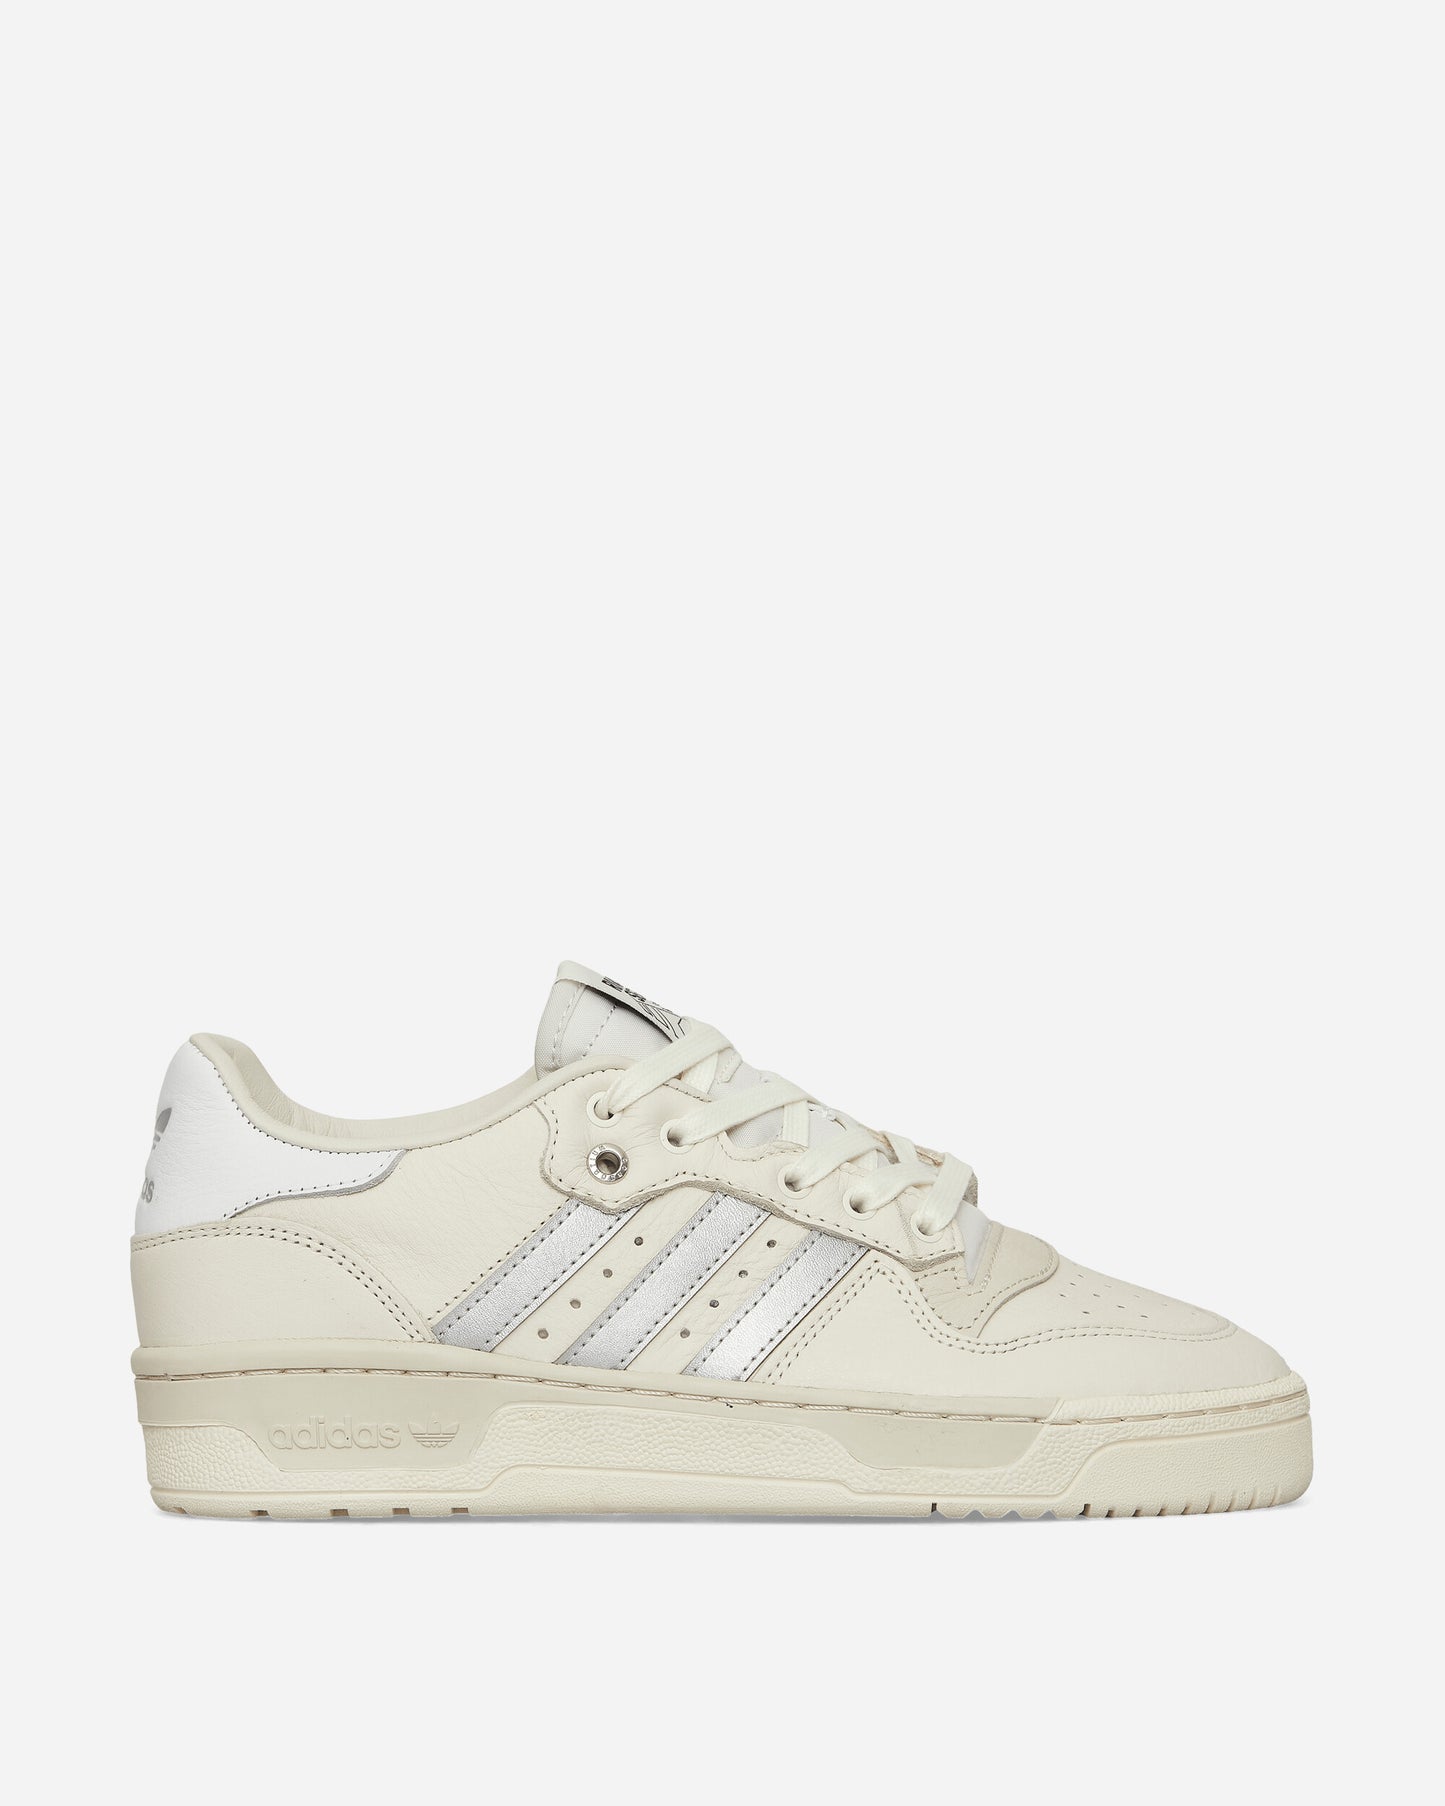 adidas Rivalry Low Consortium Chalk White/Silver Met Sneakers Low IF0603 001